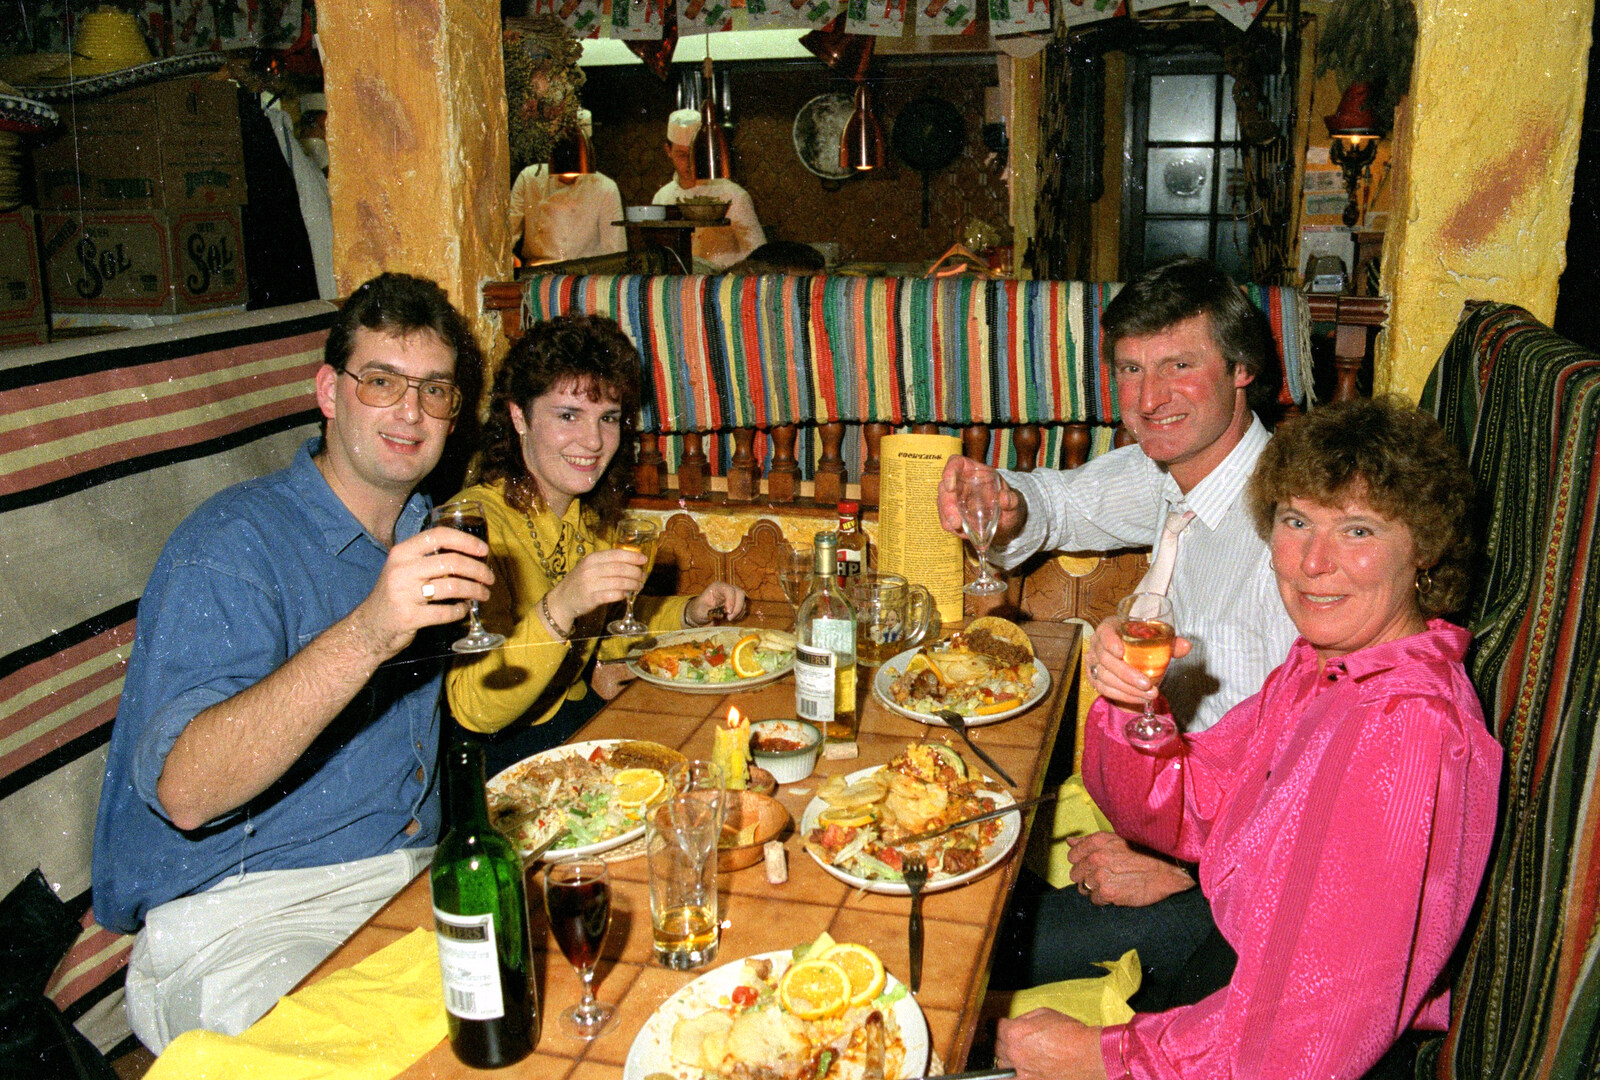 Steve, Sam, Geoff and Brenda from Pedros and Daffodils, Norwich and Billingford, Norfolk - 20th April 1991